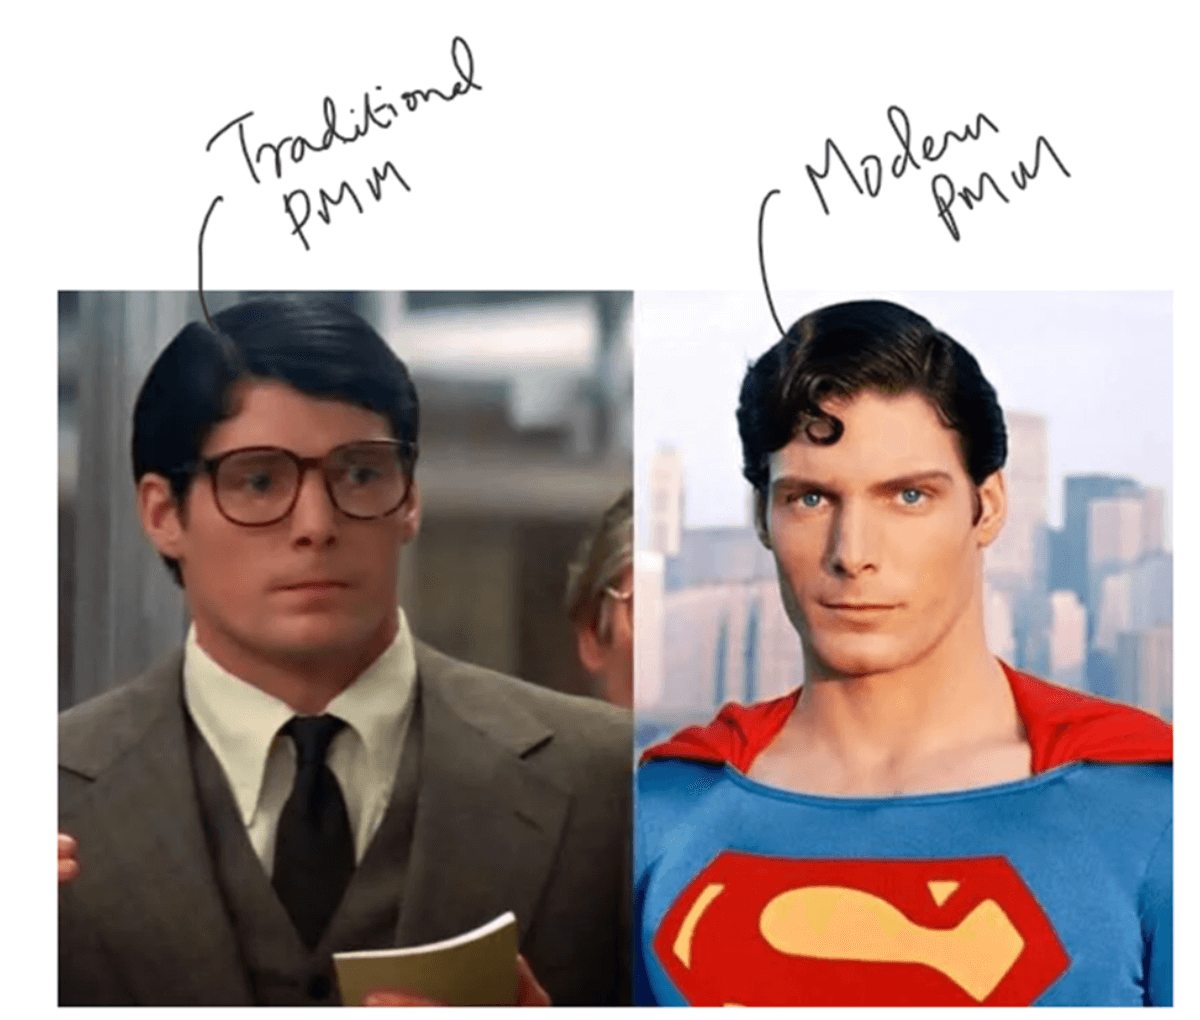 Clark Kent (left) represents modern Product Marketing Managers in a support function role, and Superman with an outlandish costume represents Product Marketing Managers fighting to generate demand for the organization.